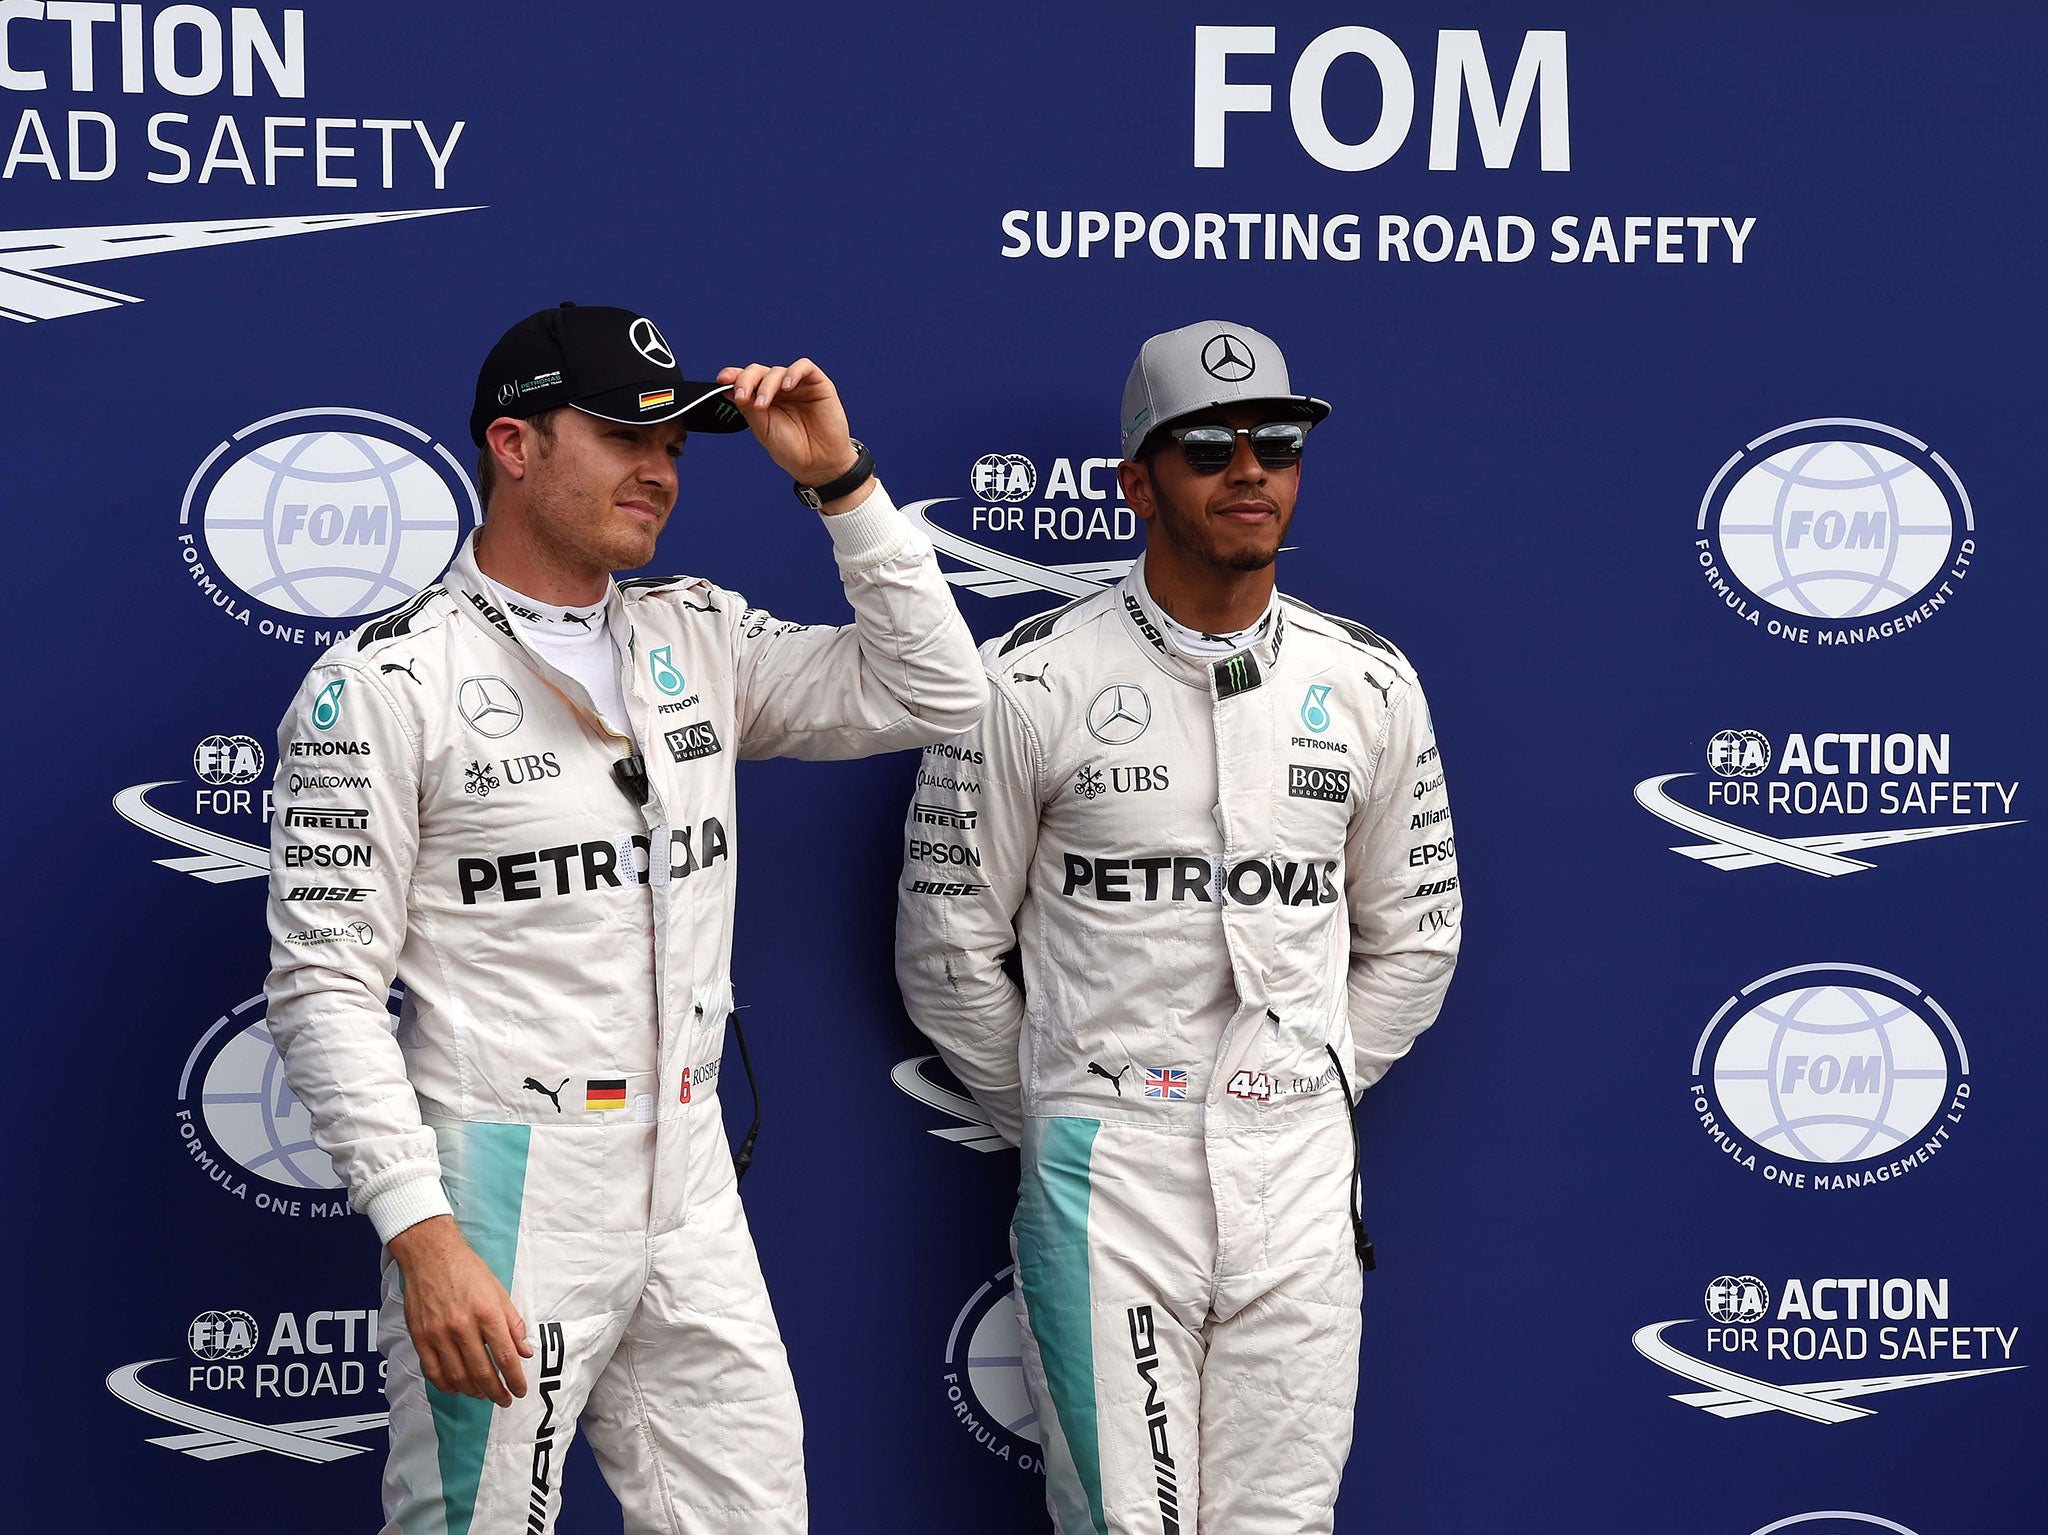 Lewis Hamilton looked tense standing next to Nico Rosberg after handing his teammate pole position